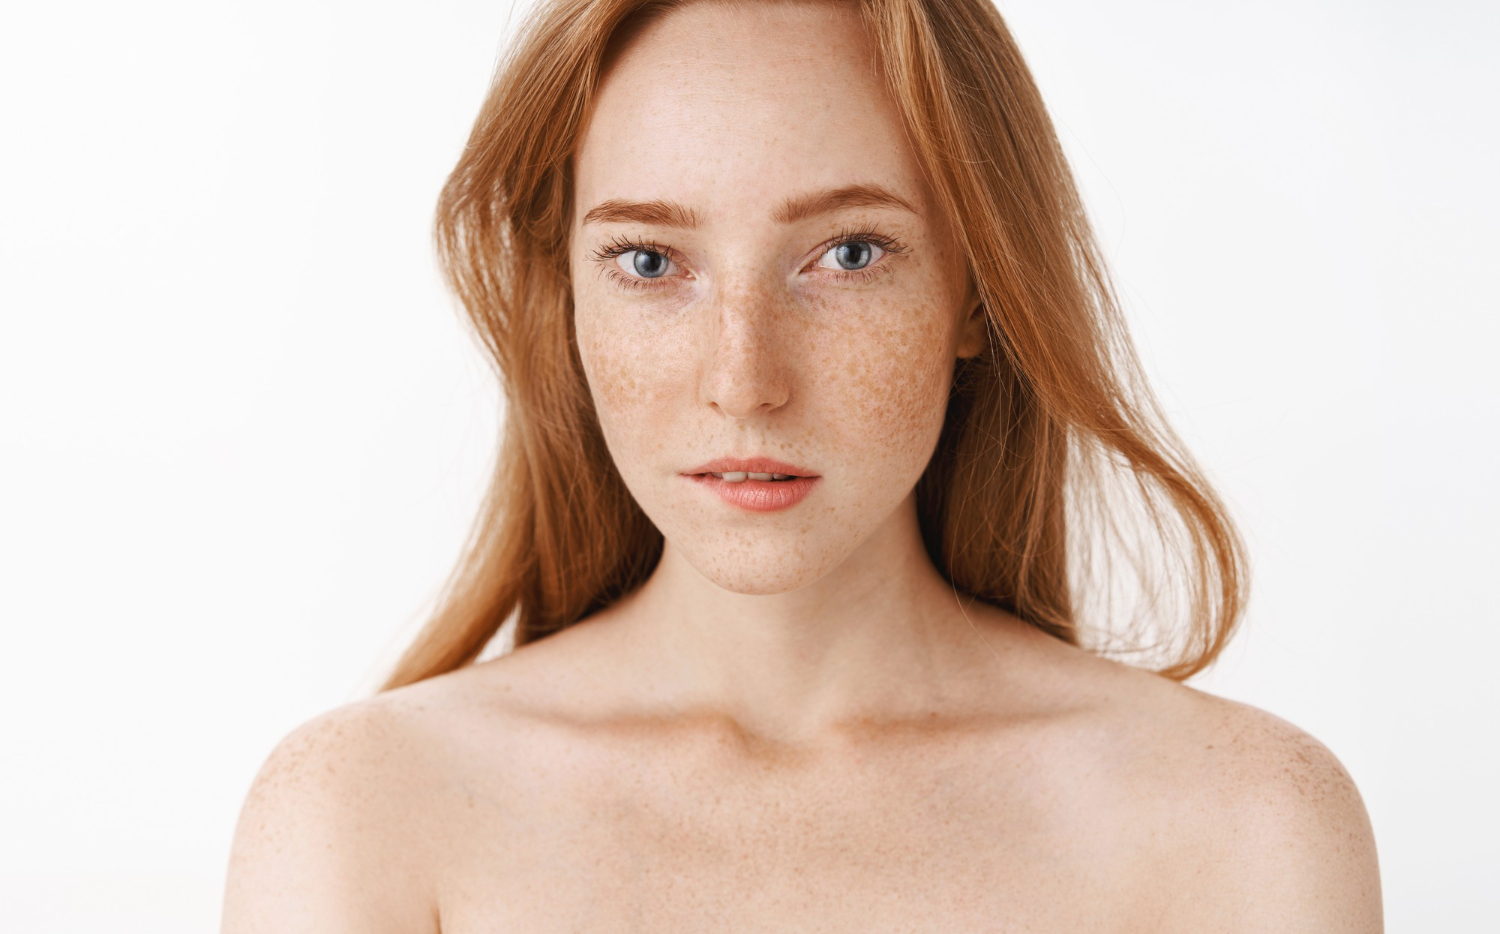 charming feminine redhead young woman with freckles beautiful jewell